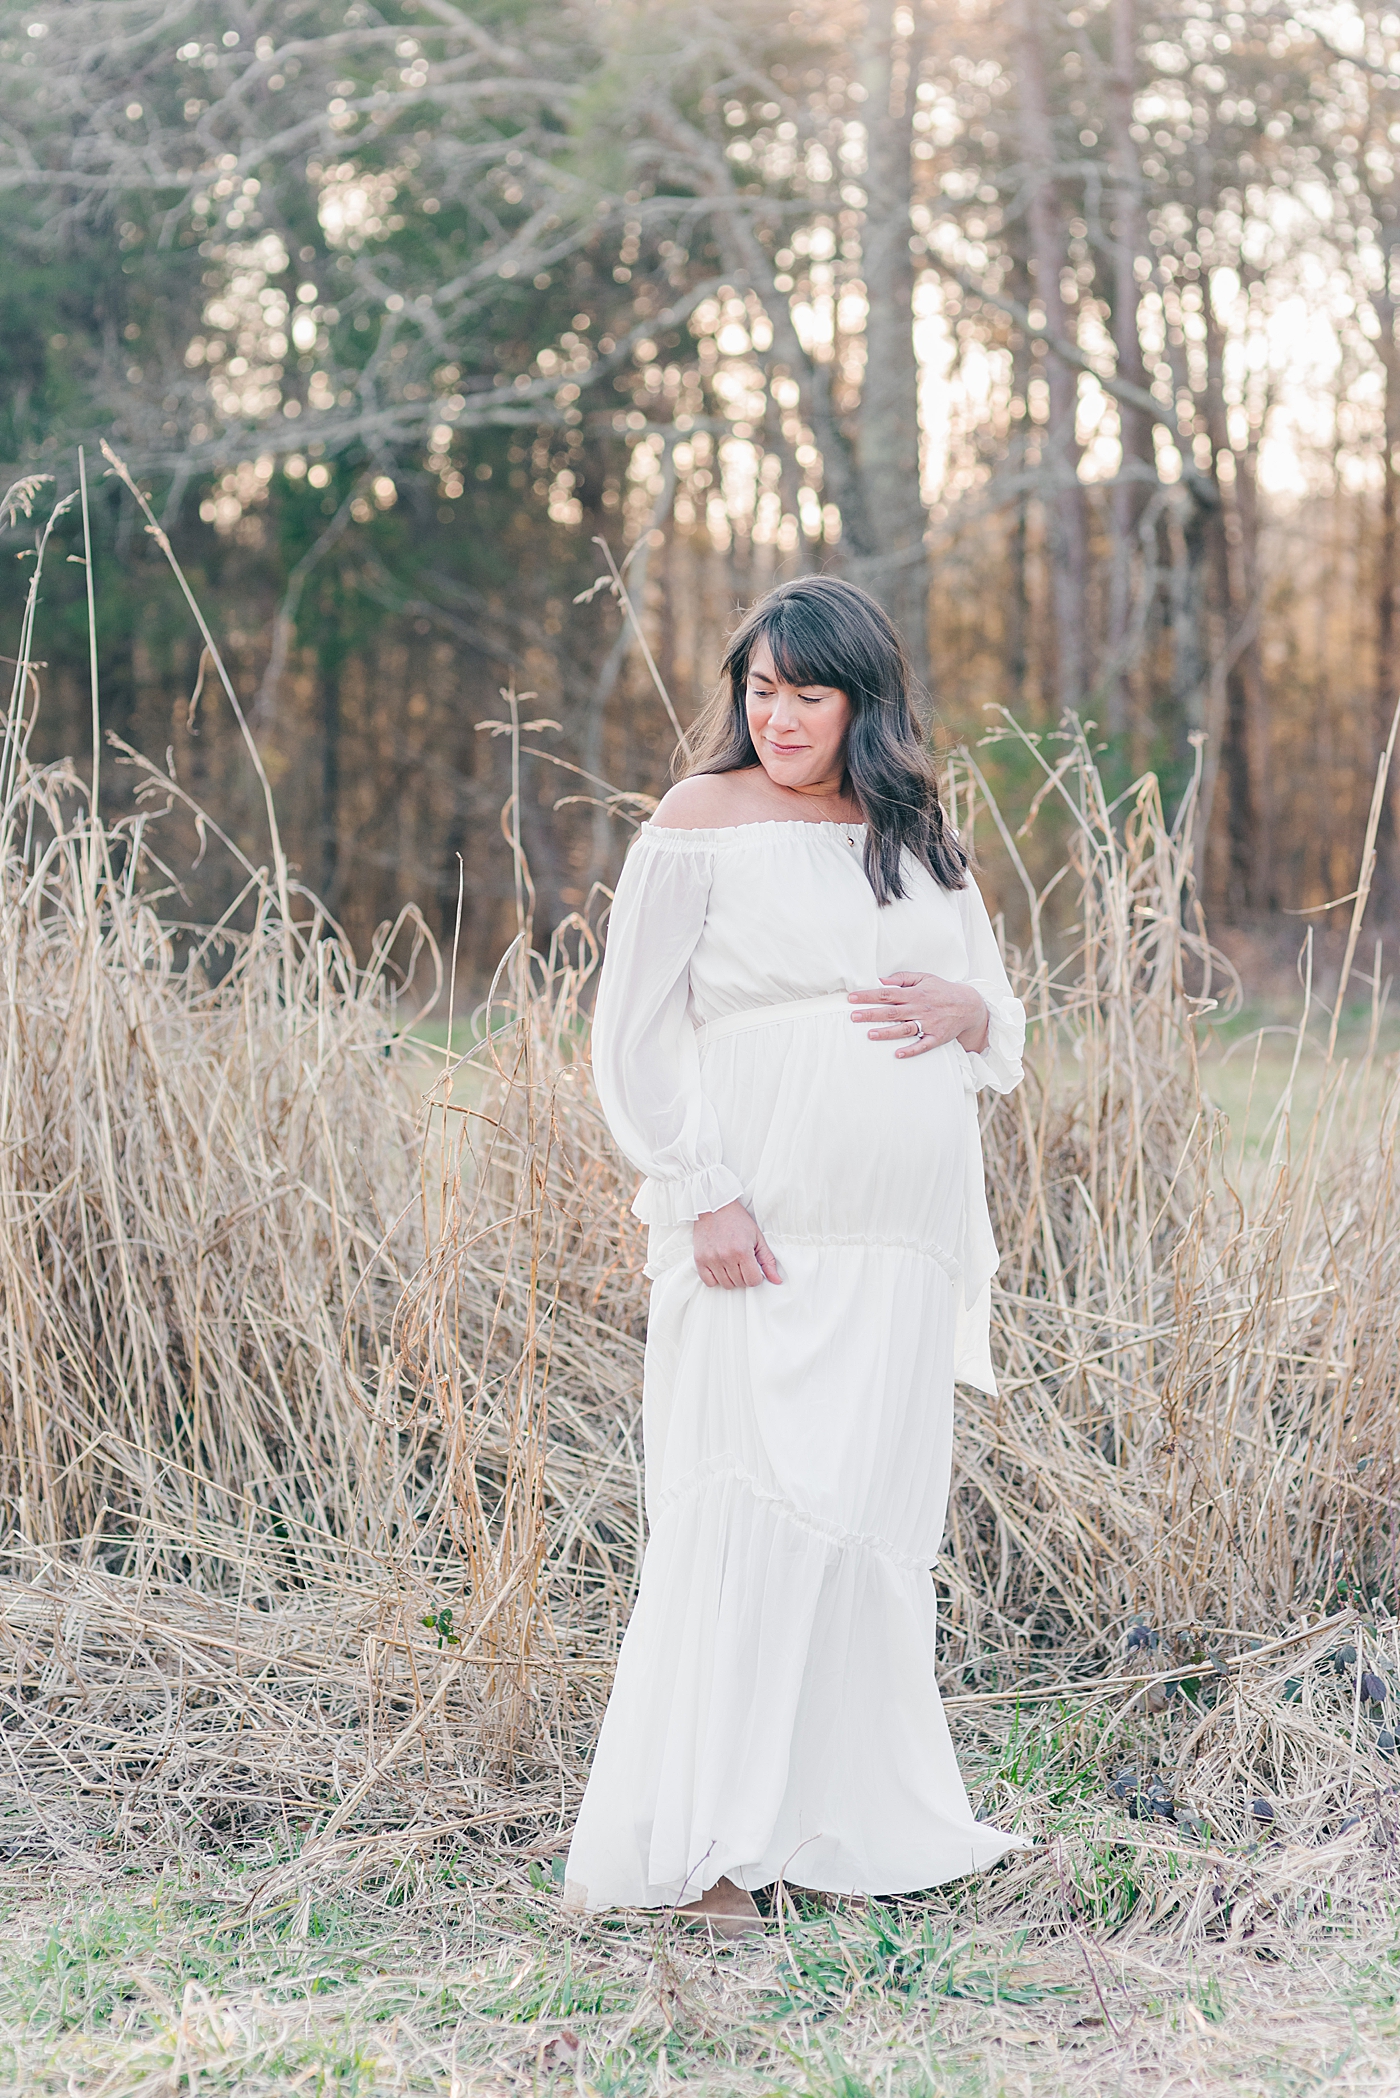 Expecting mom in white dress in a field at sunset | Photo by Anna Wisjo Photography